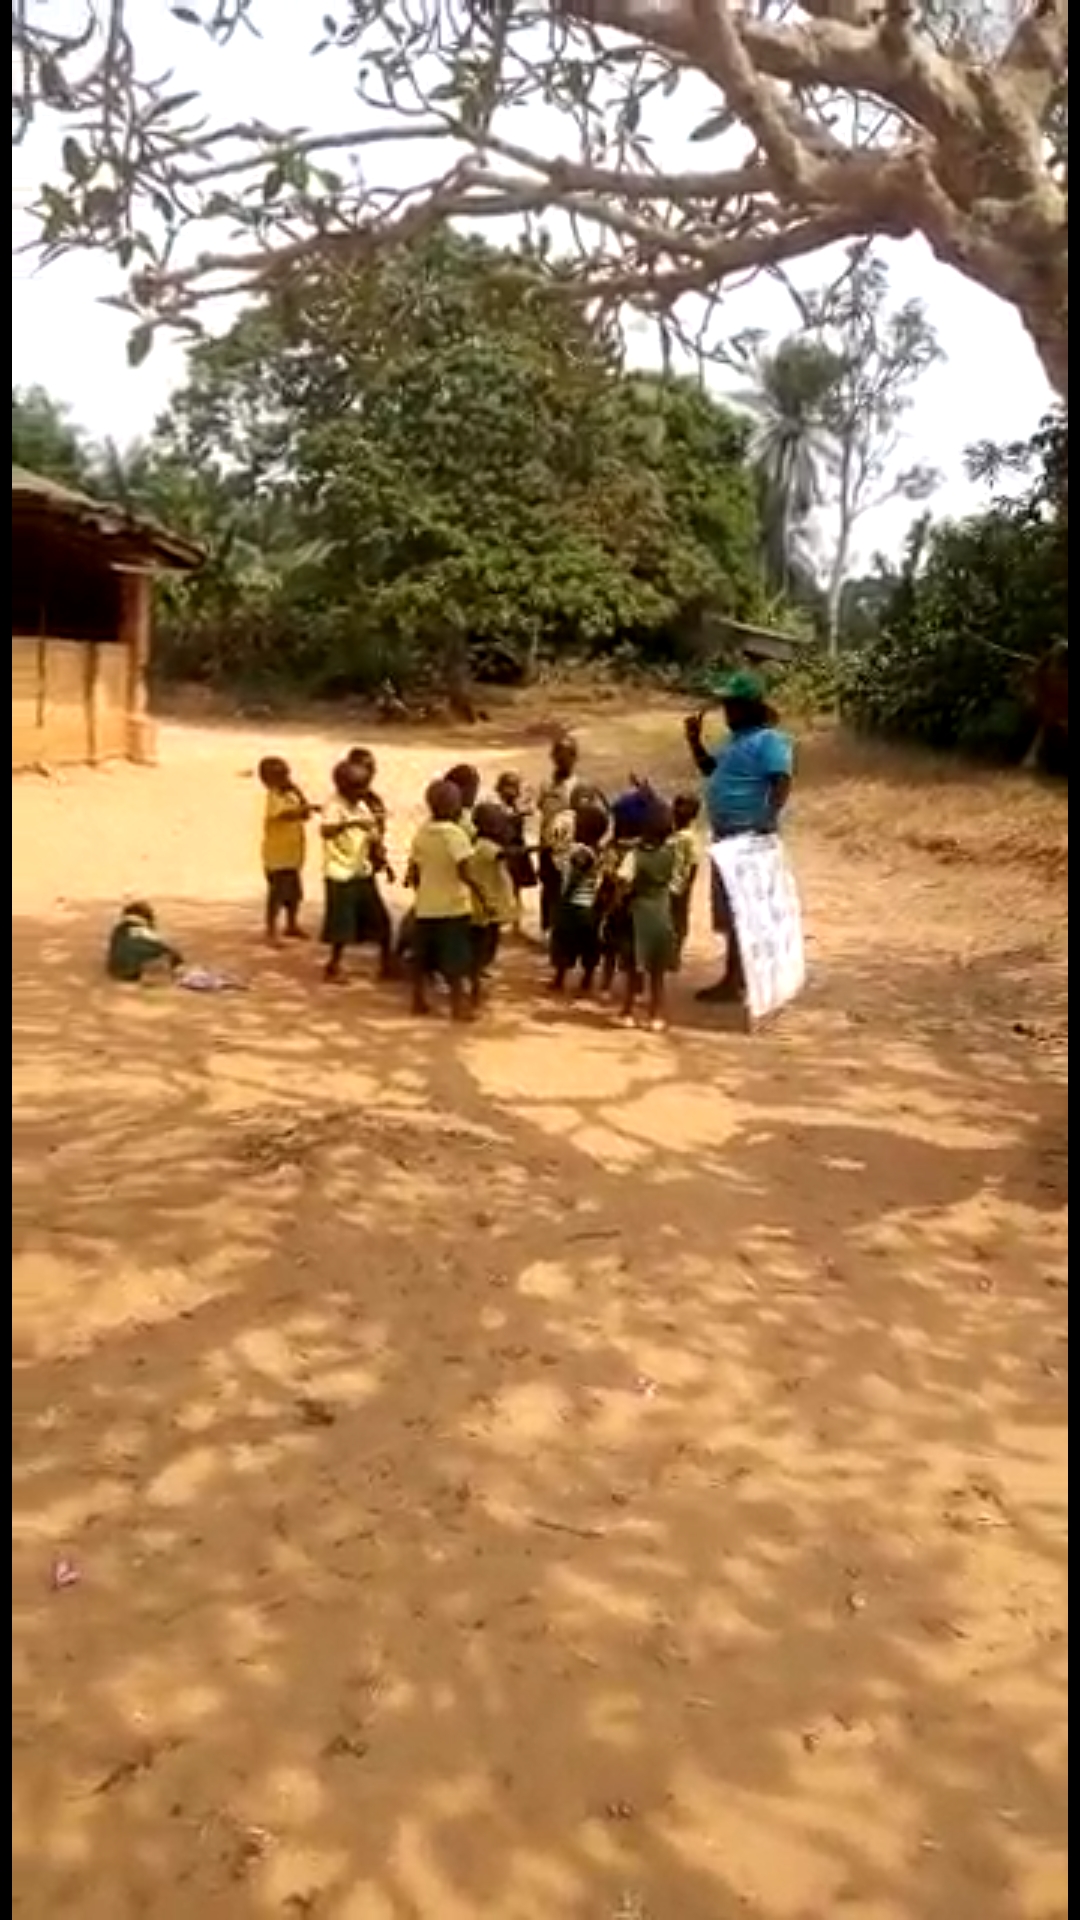 Meet Abia community school where children learn under tree without seats